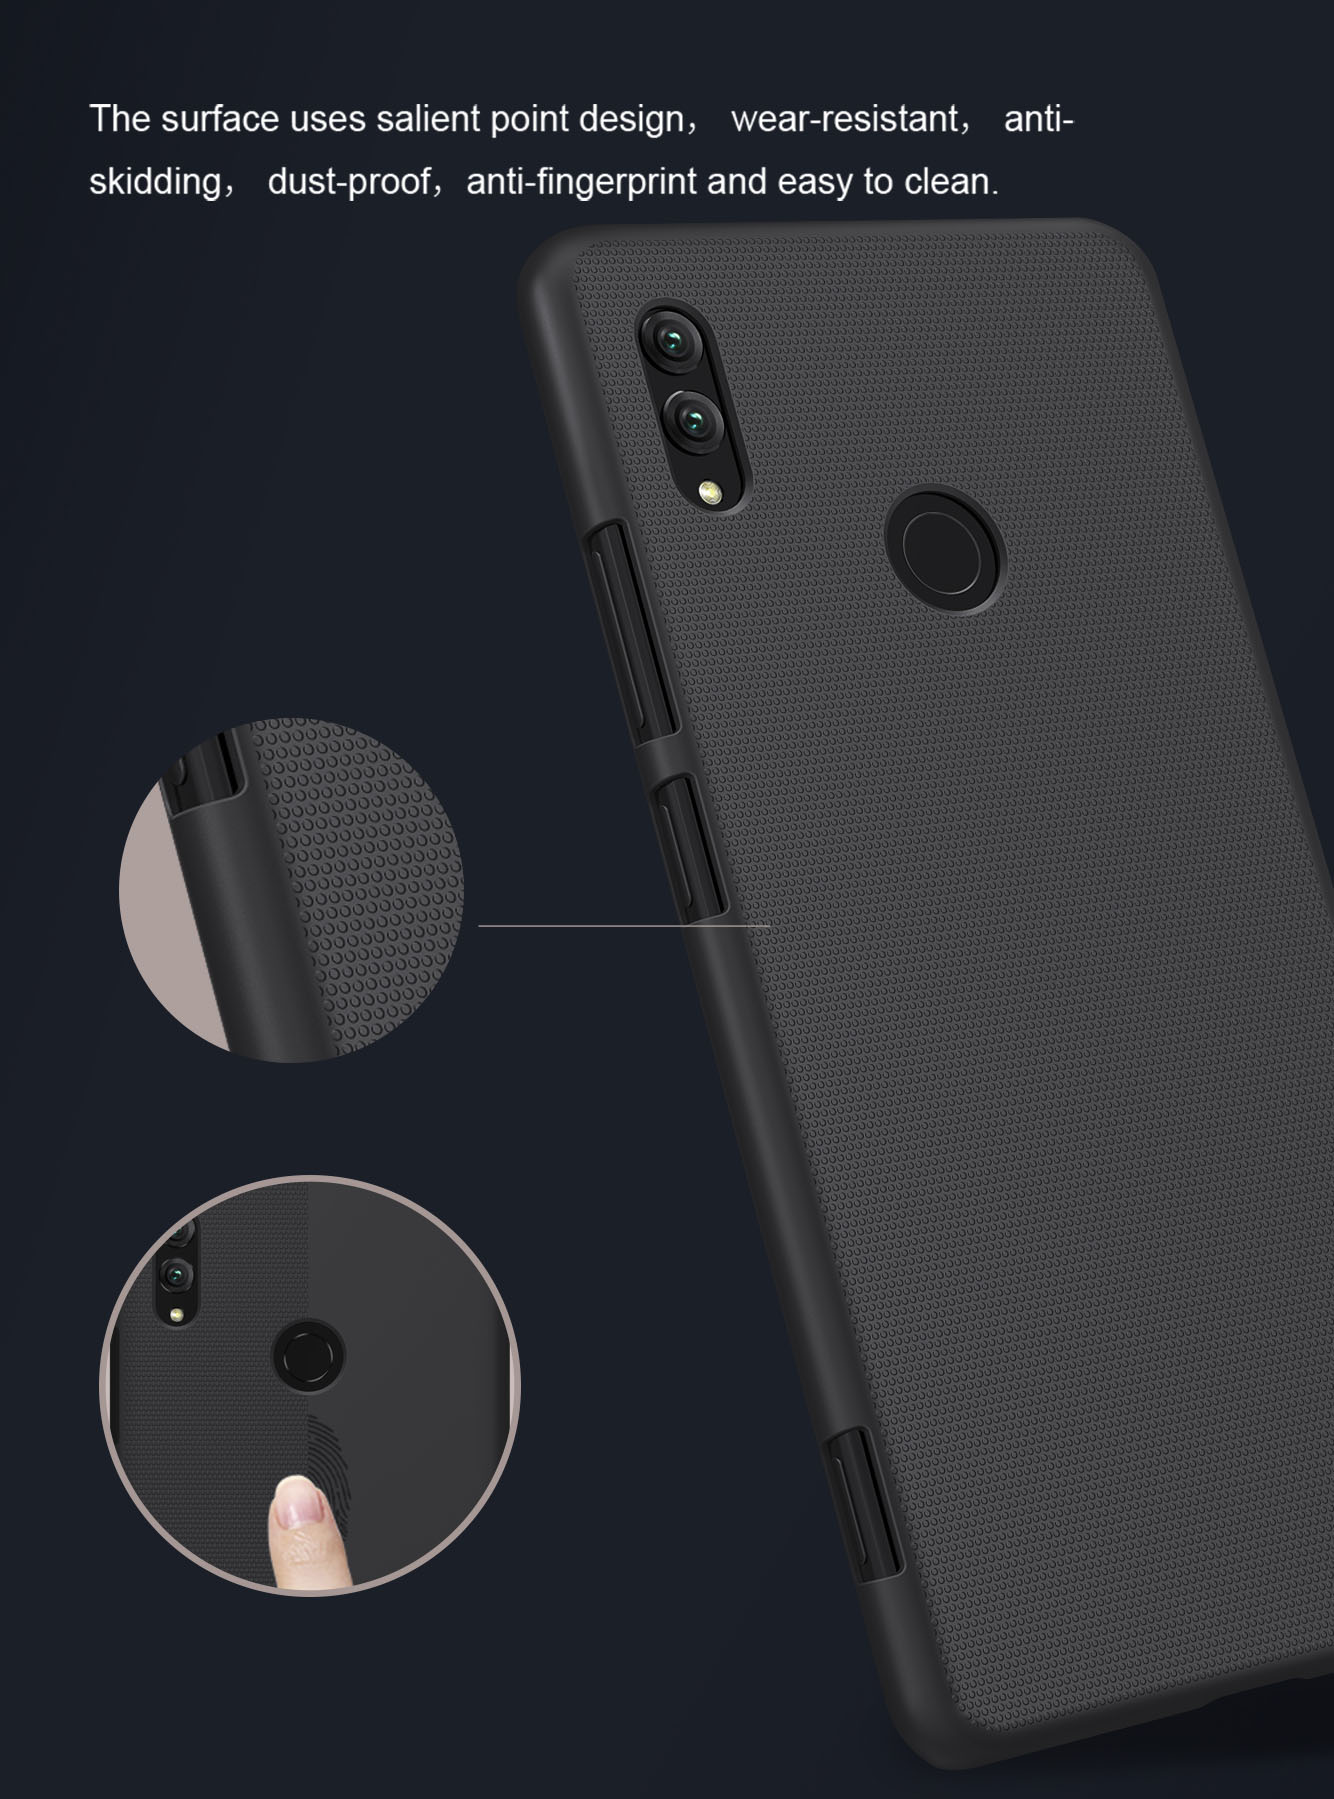 Honor Note 10 case